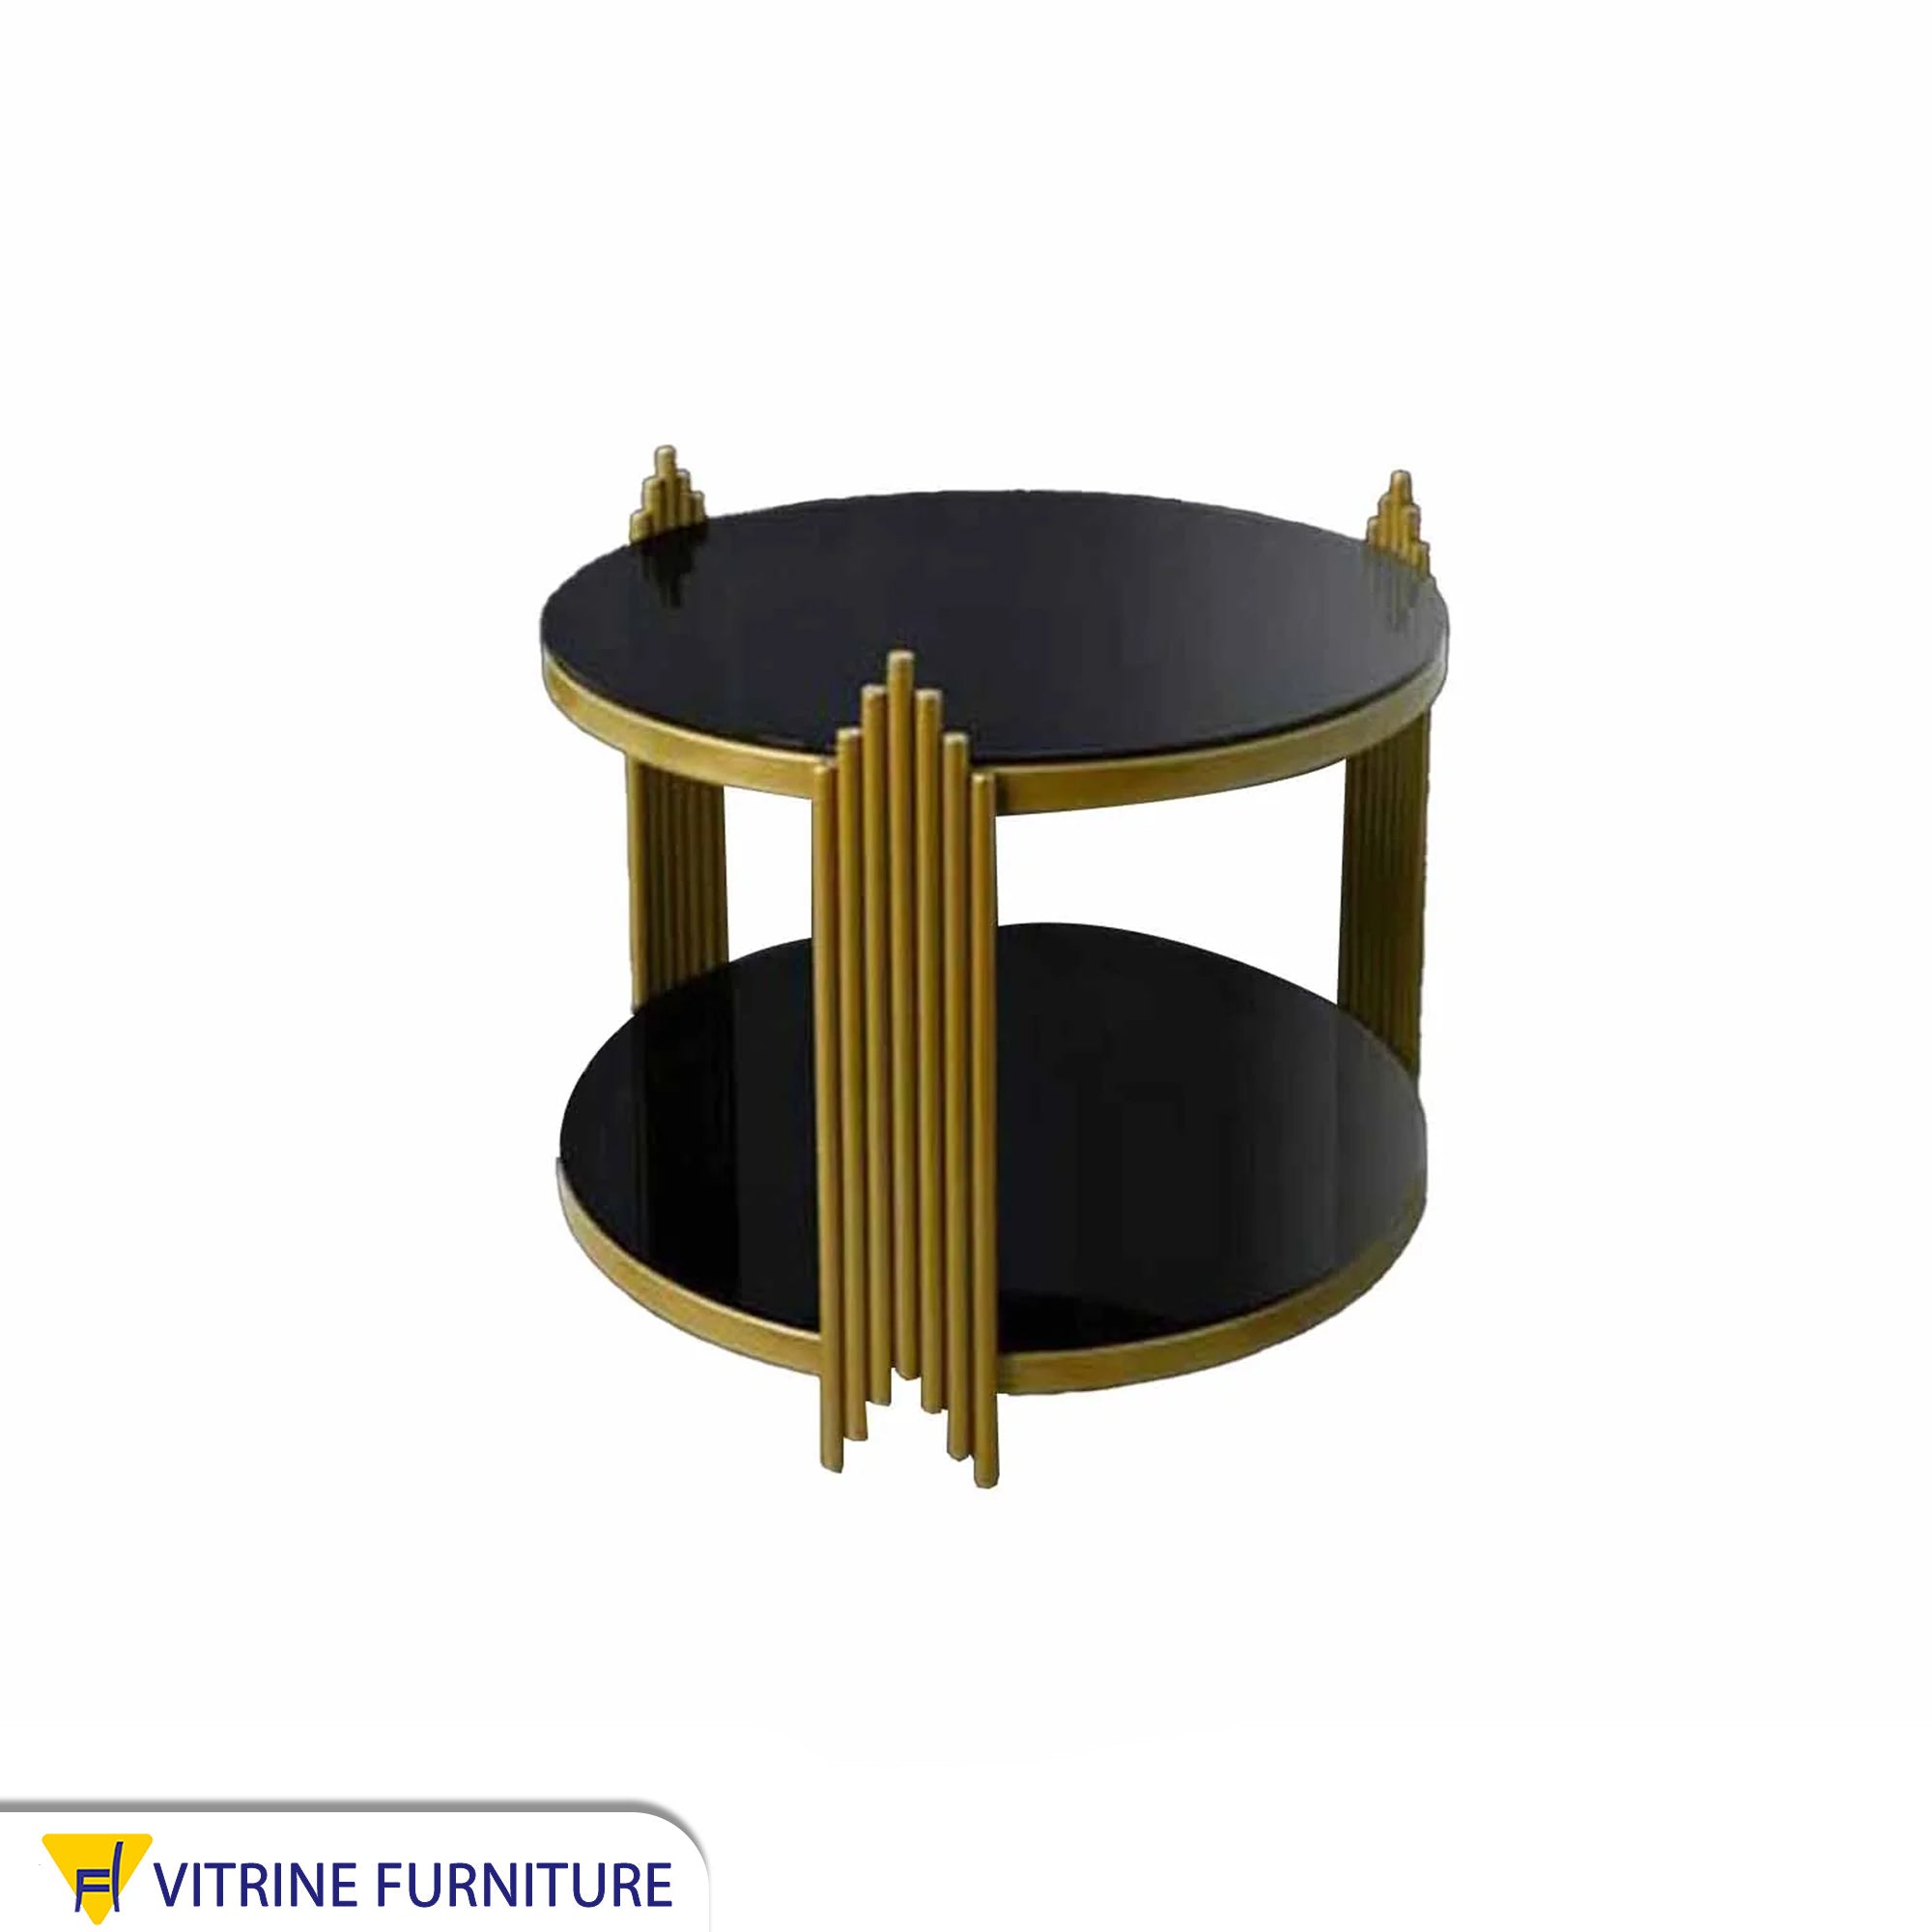 Large coffee table in black and gold